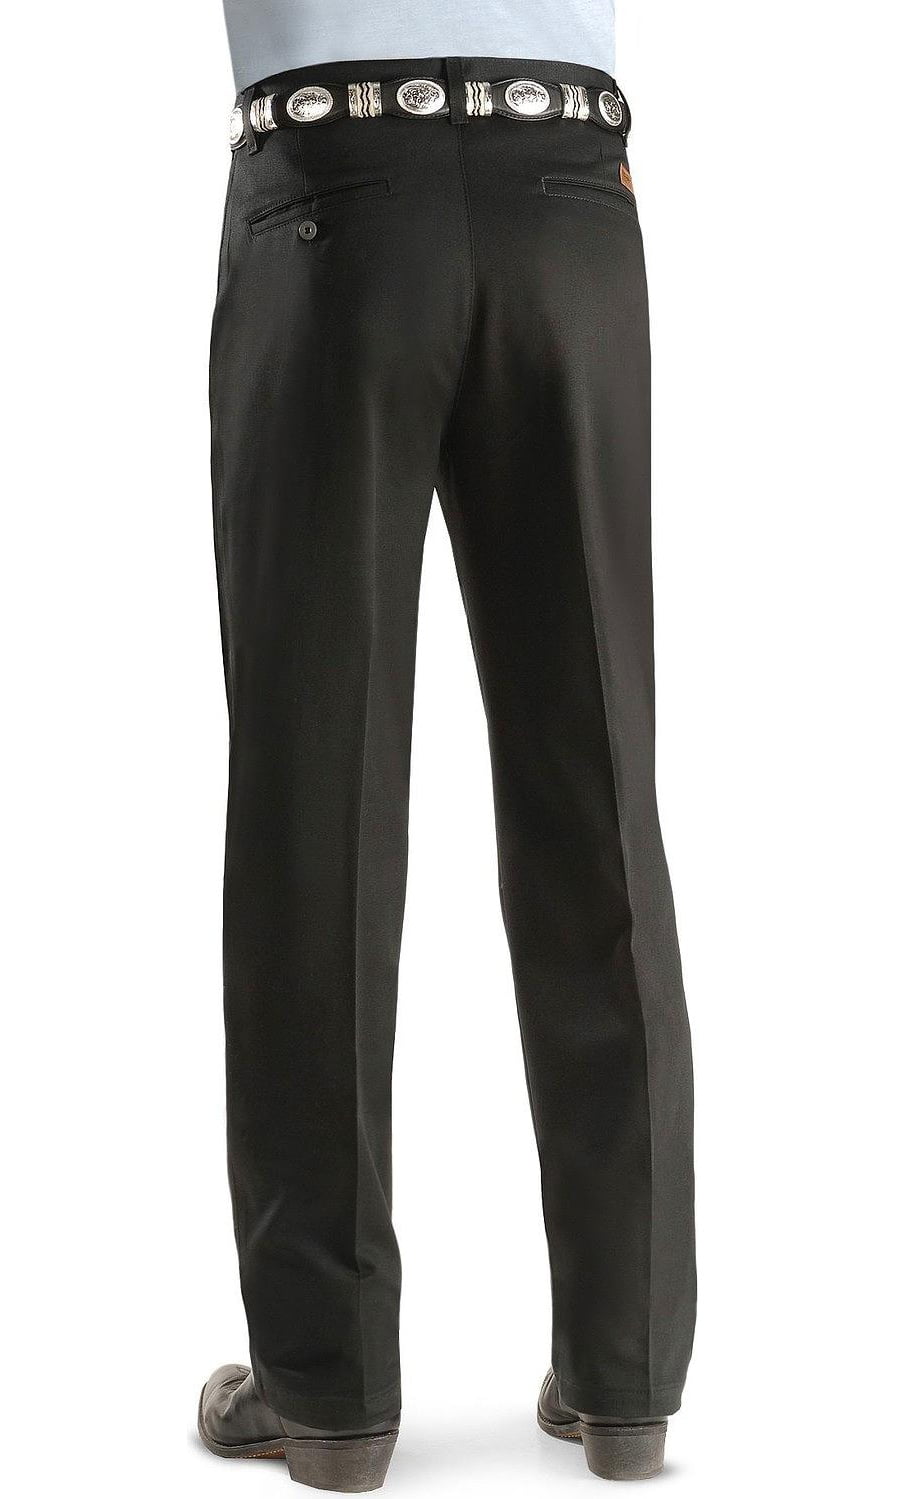 Wrangler Men’s Riata Pleated Relaxed Fit Casual Pant